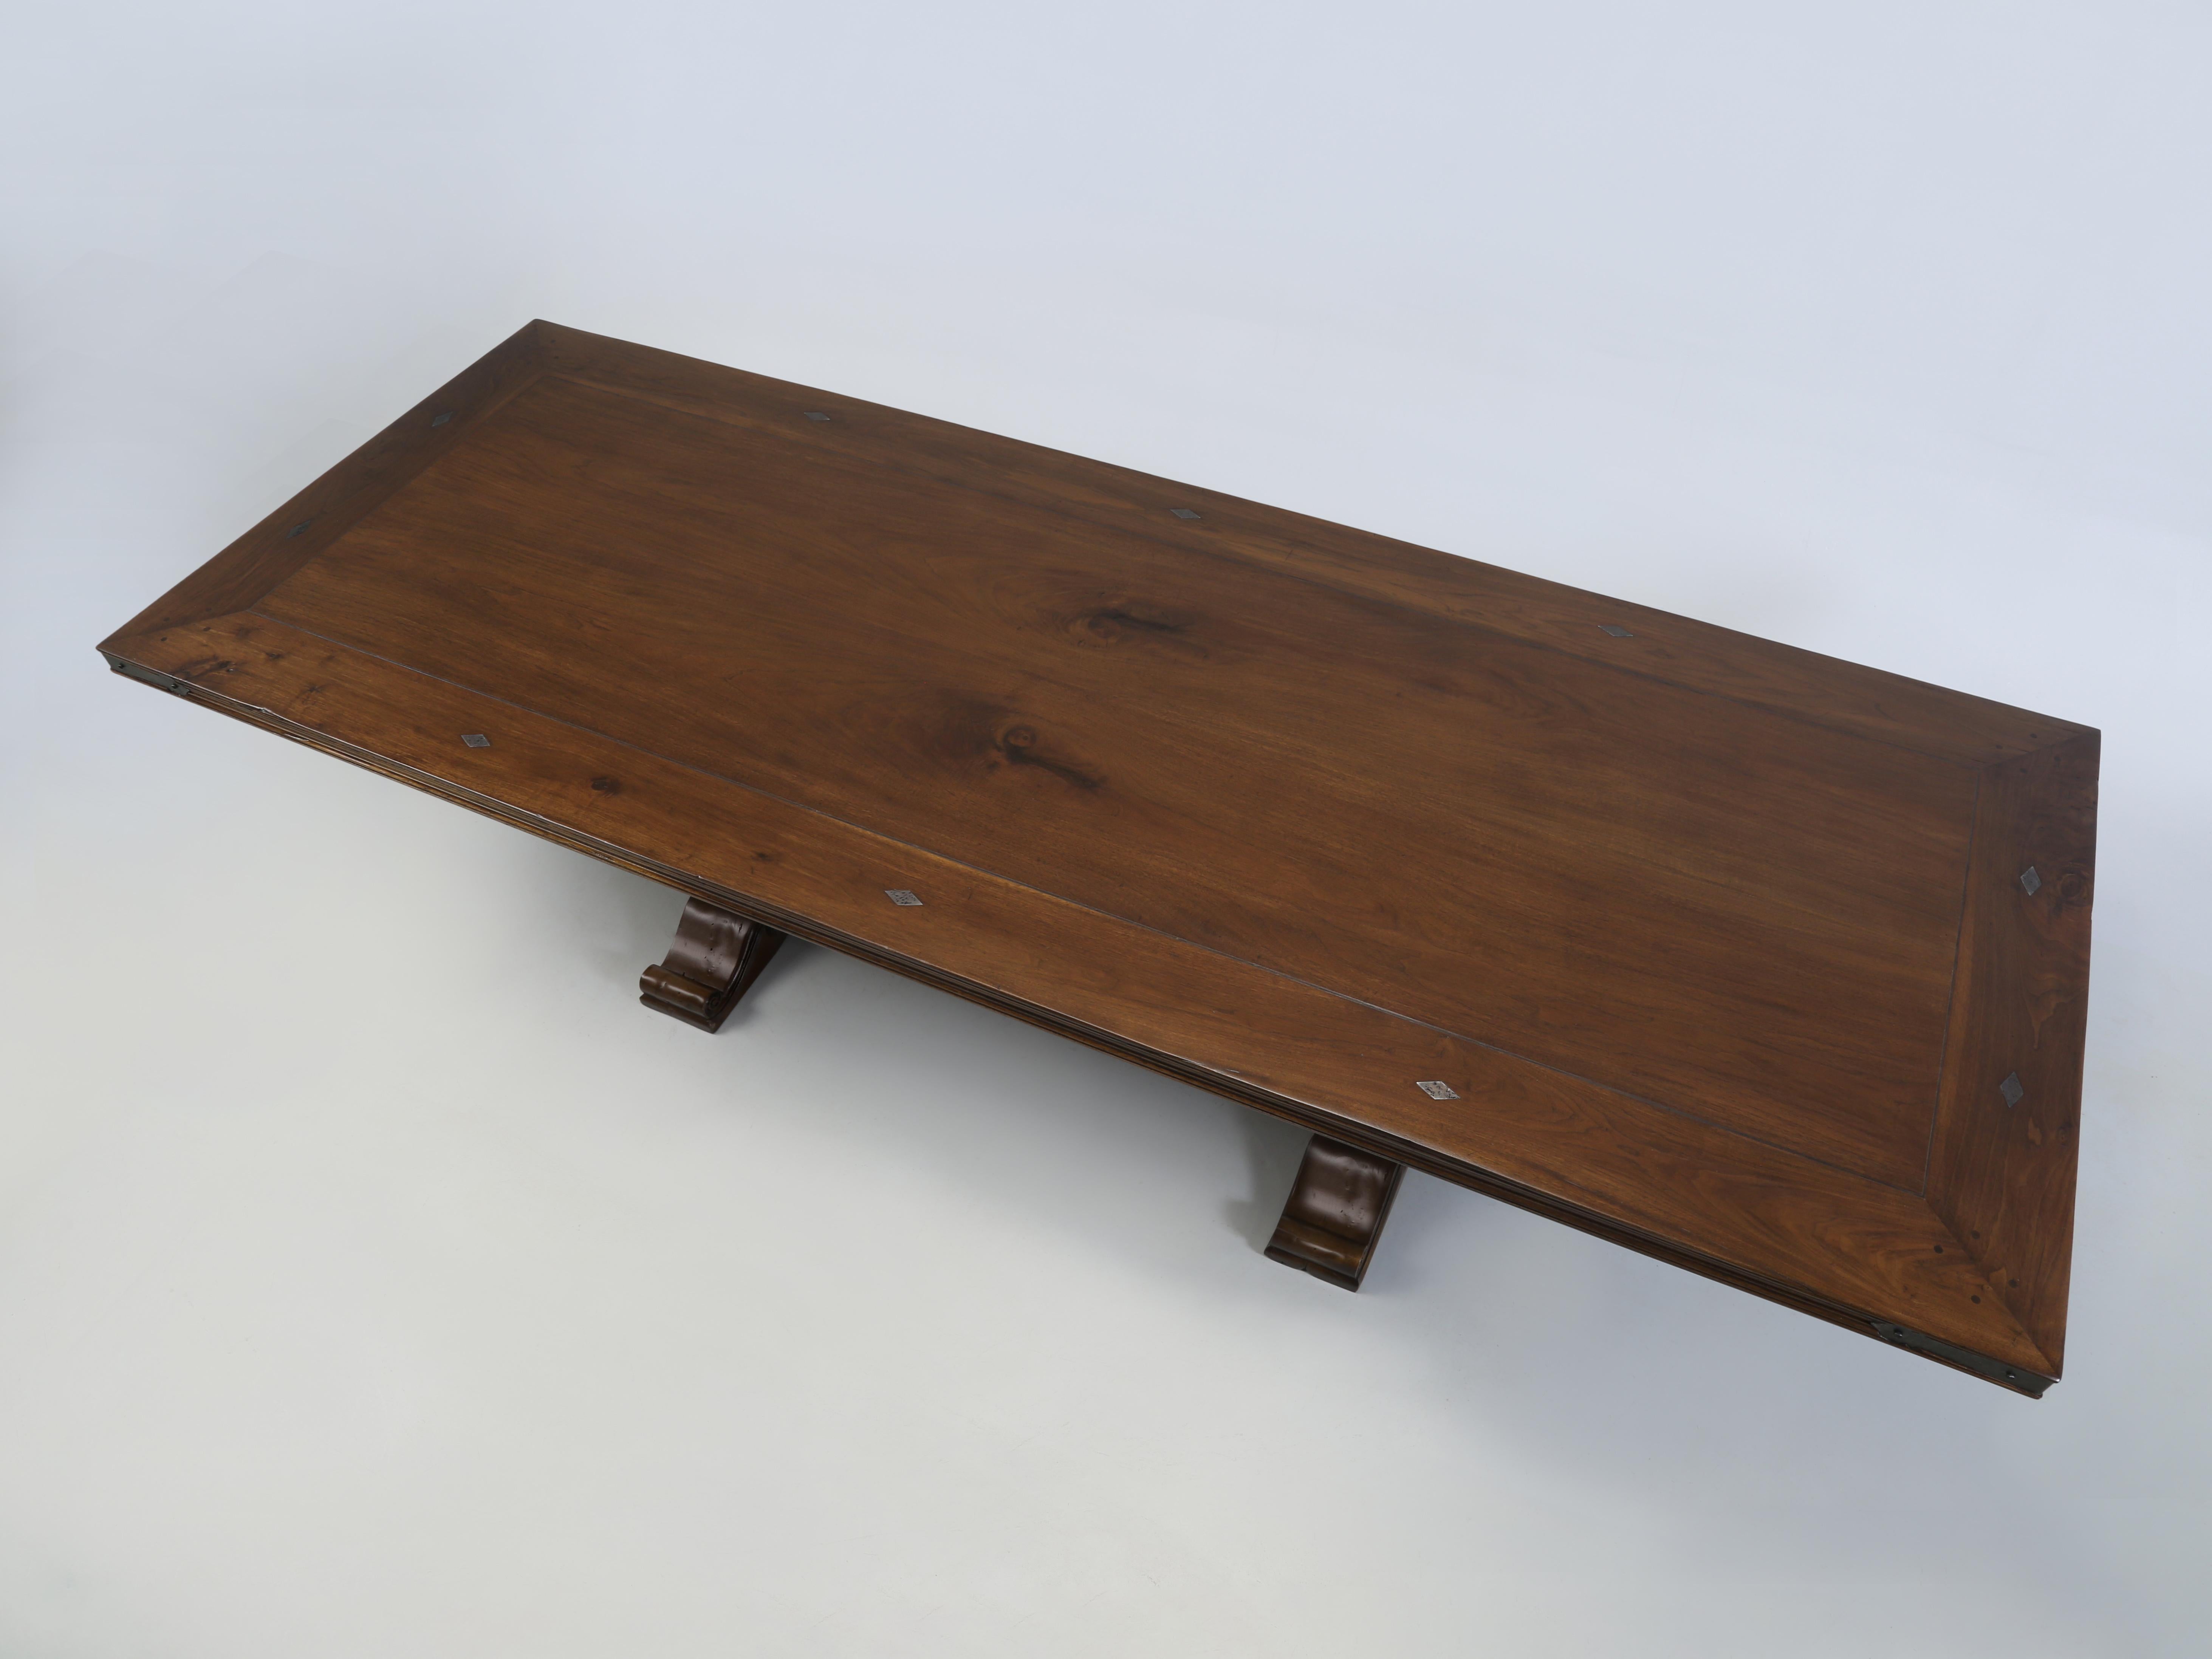 Country French Inspired Walnut Dining Table made by Old Plank in our woodworking department and of course, available in any dimension or finish you desire. We came across this classic Country French Design Walnut Dining Table, while visiting The